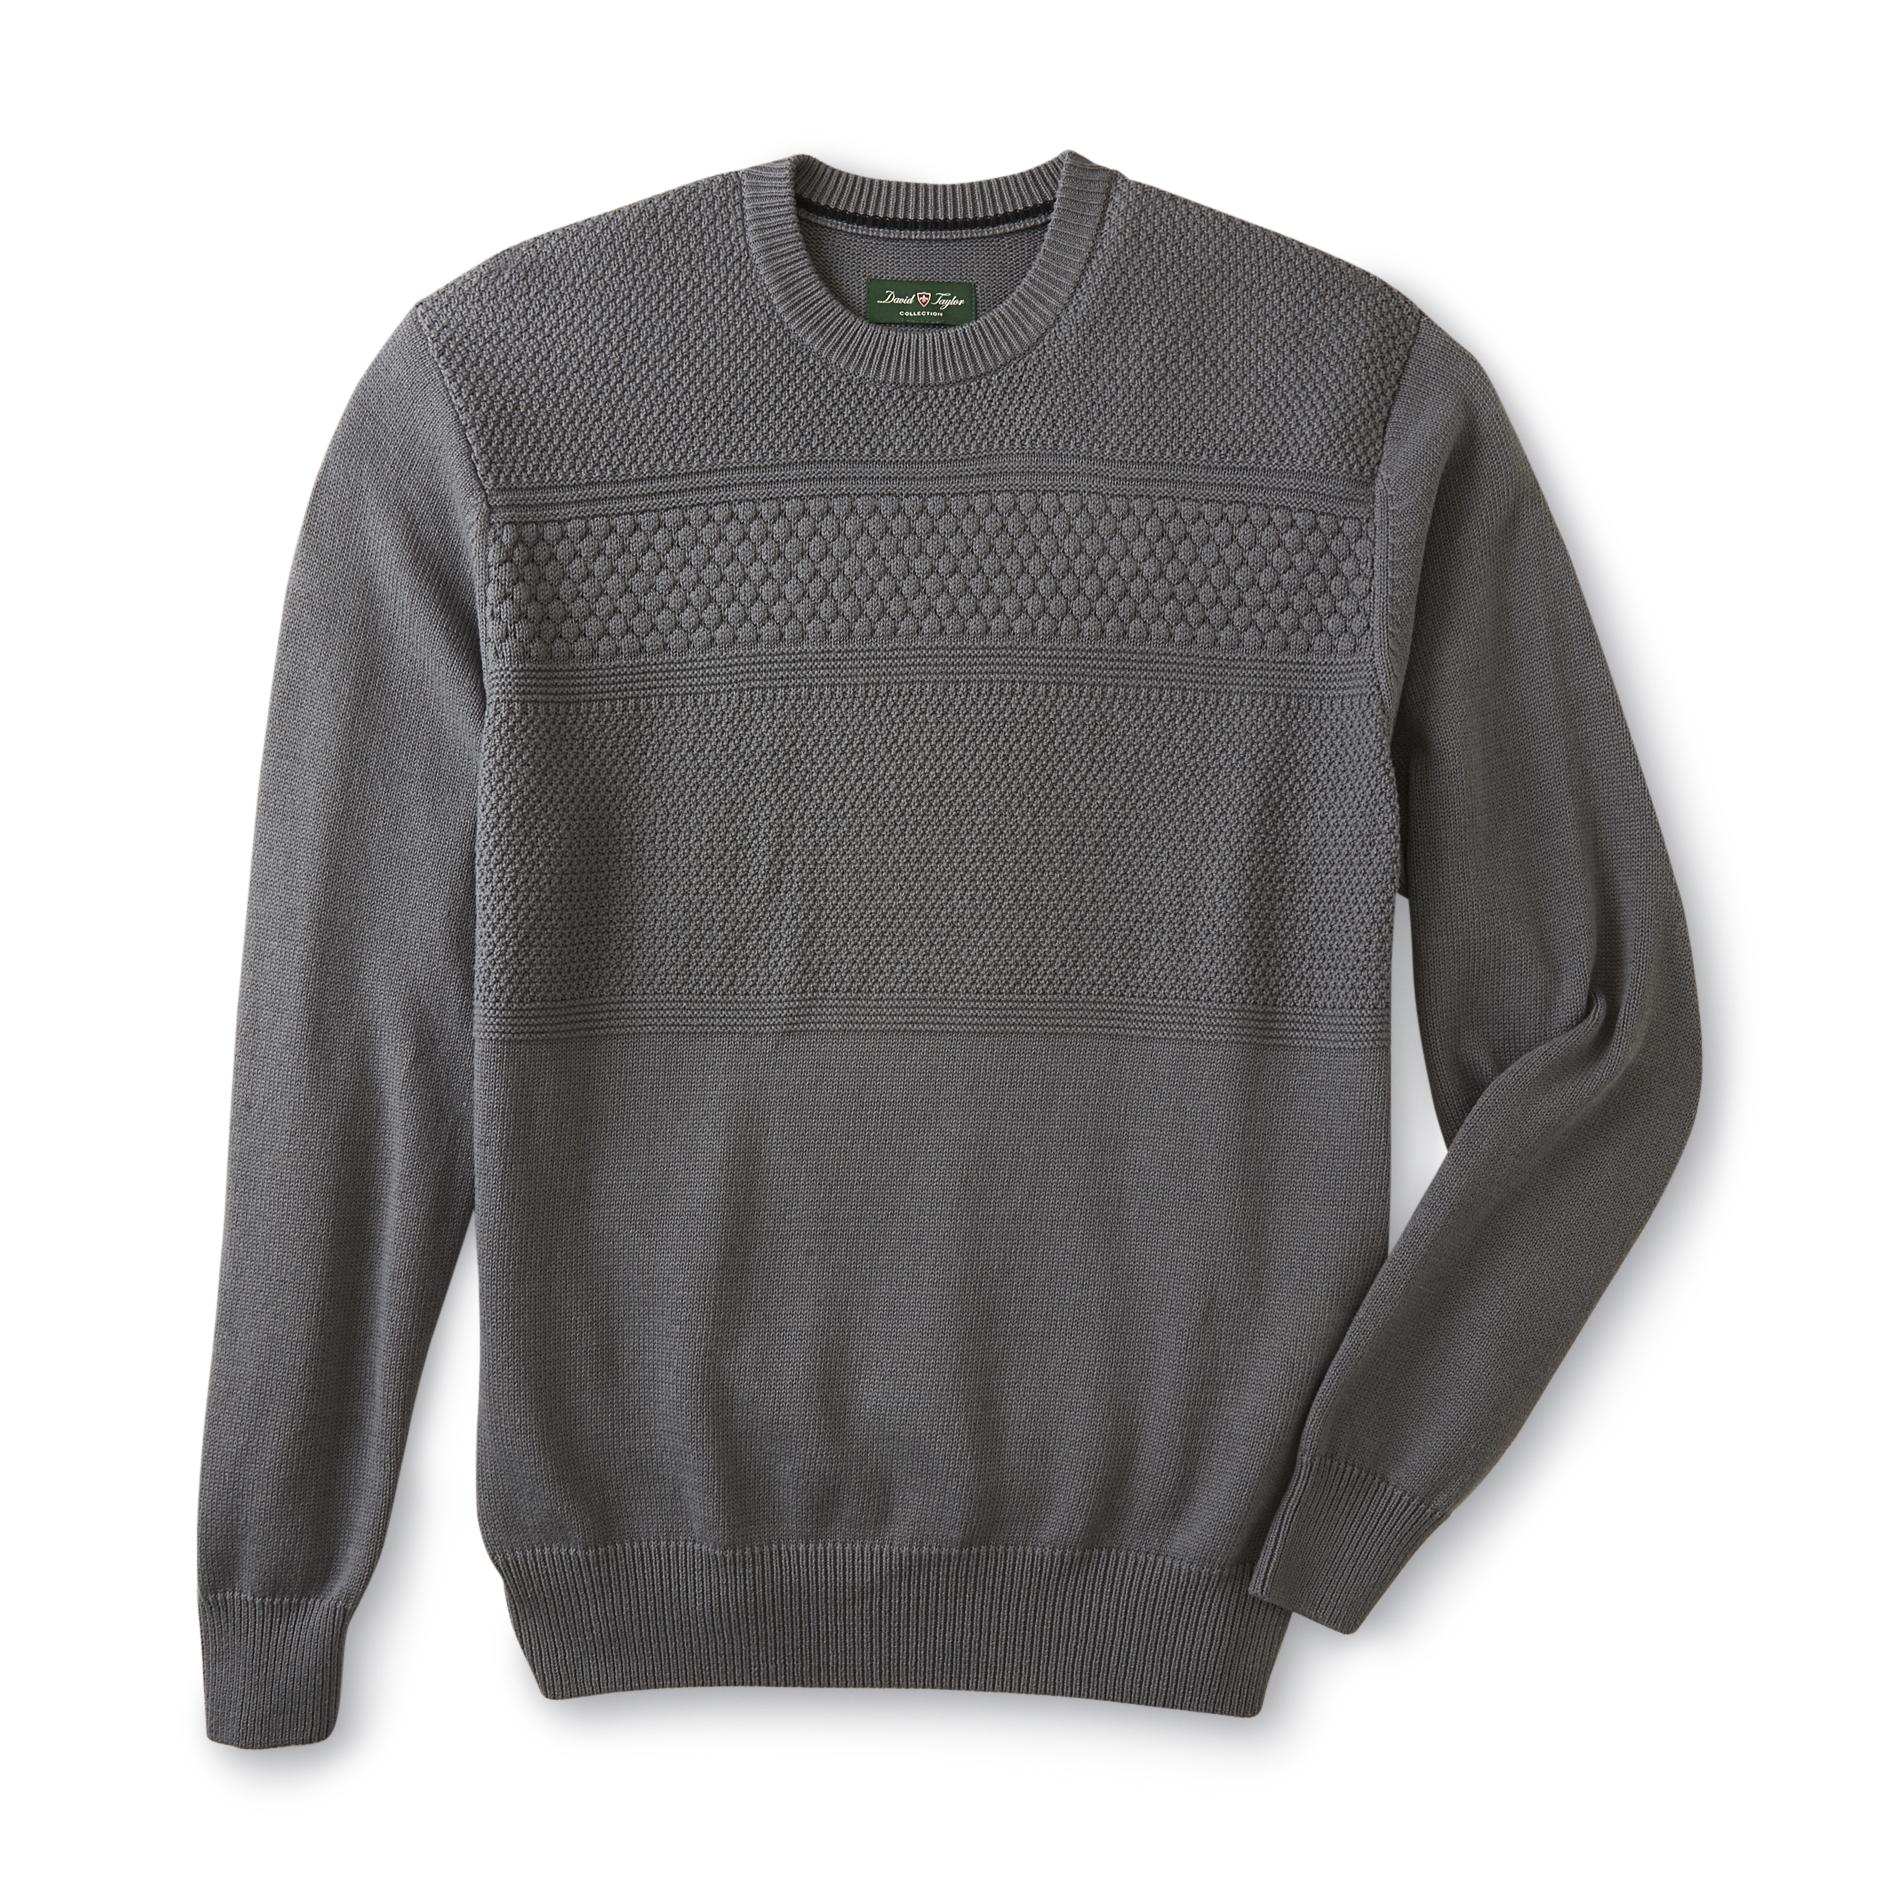 David Taylor Collection Men's Crew Neck Sweater